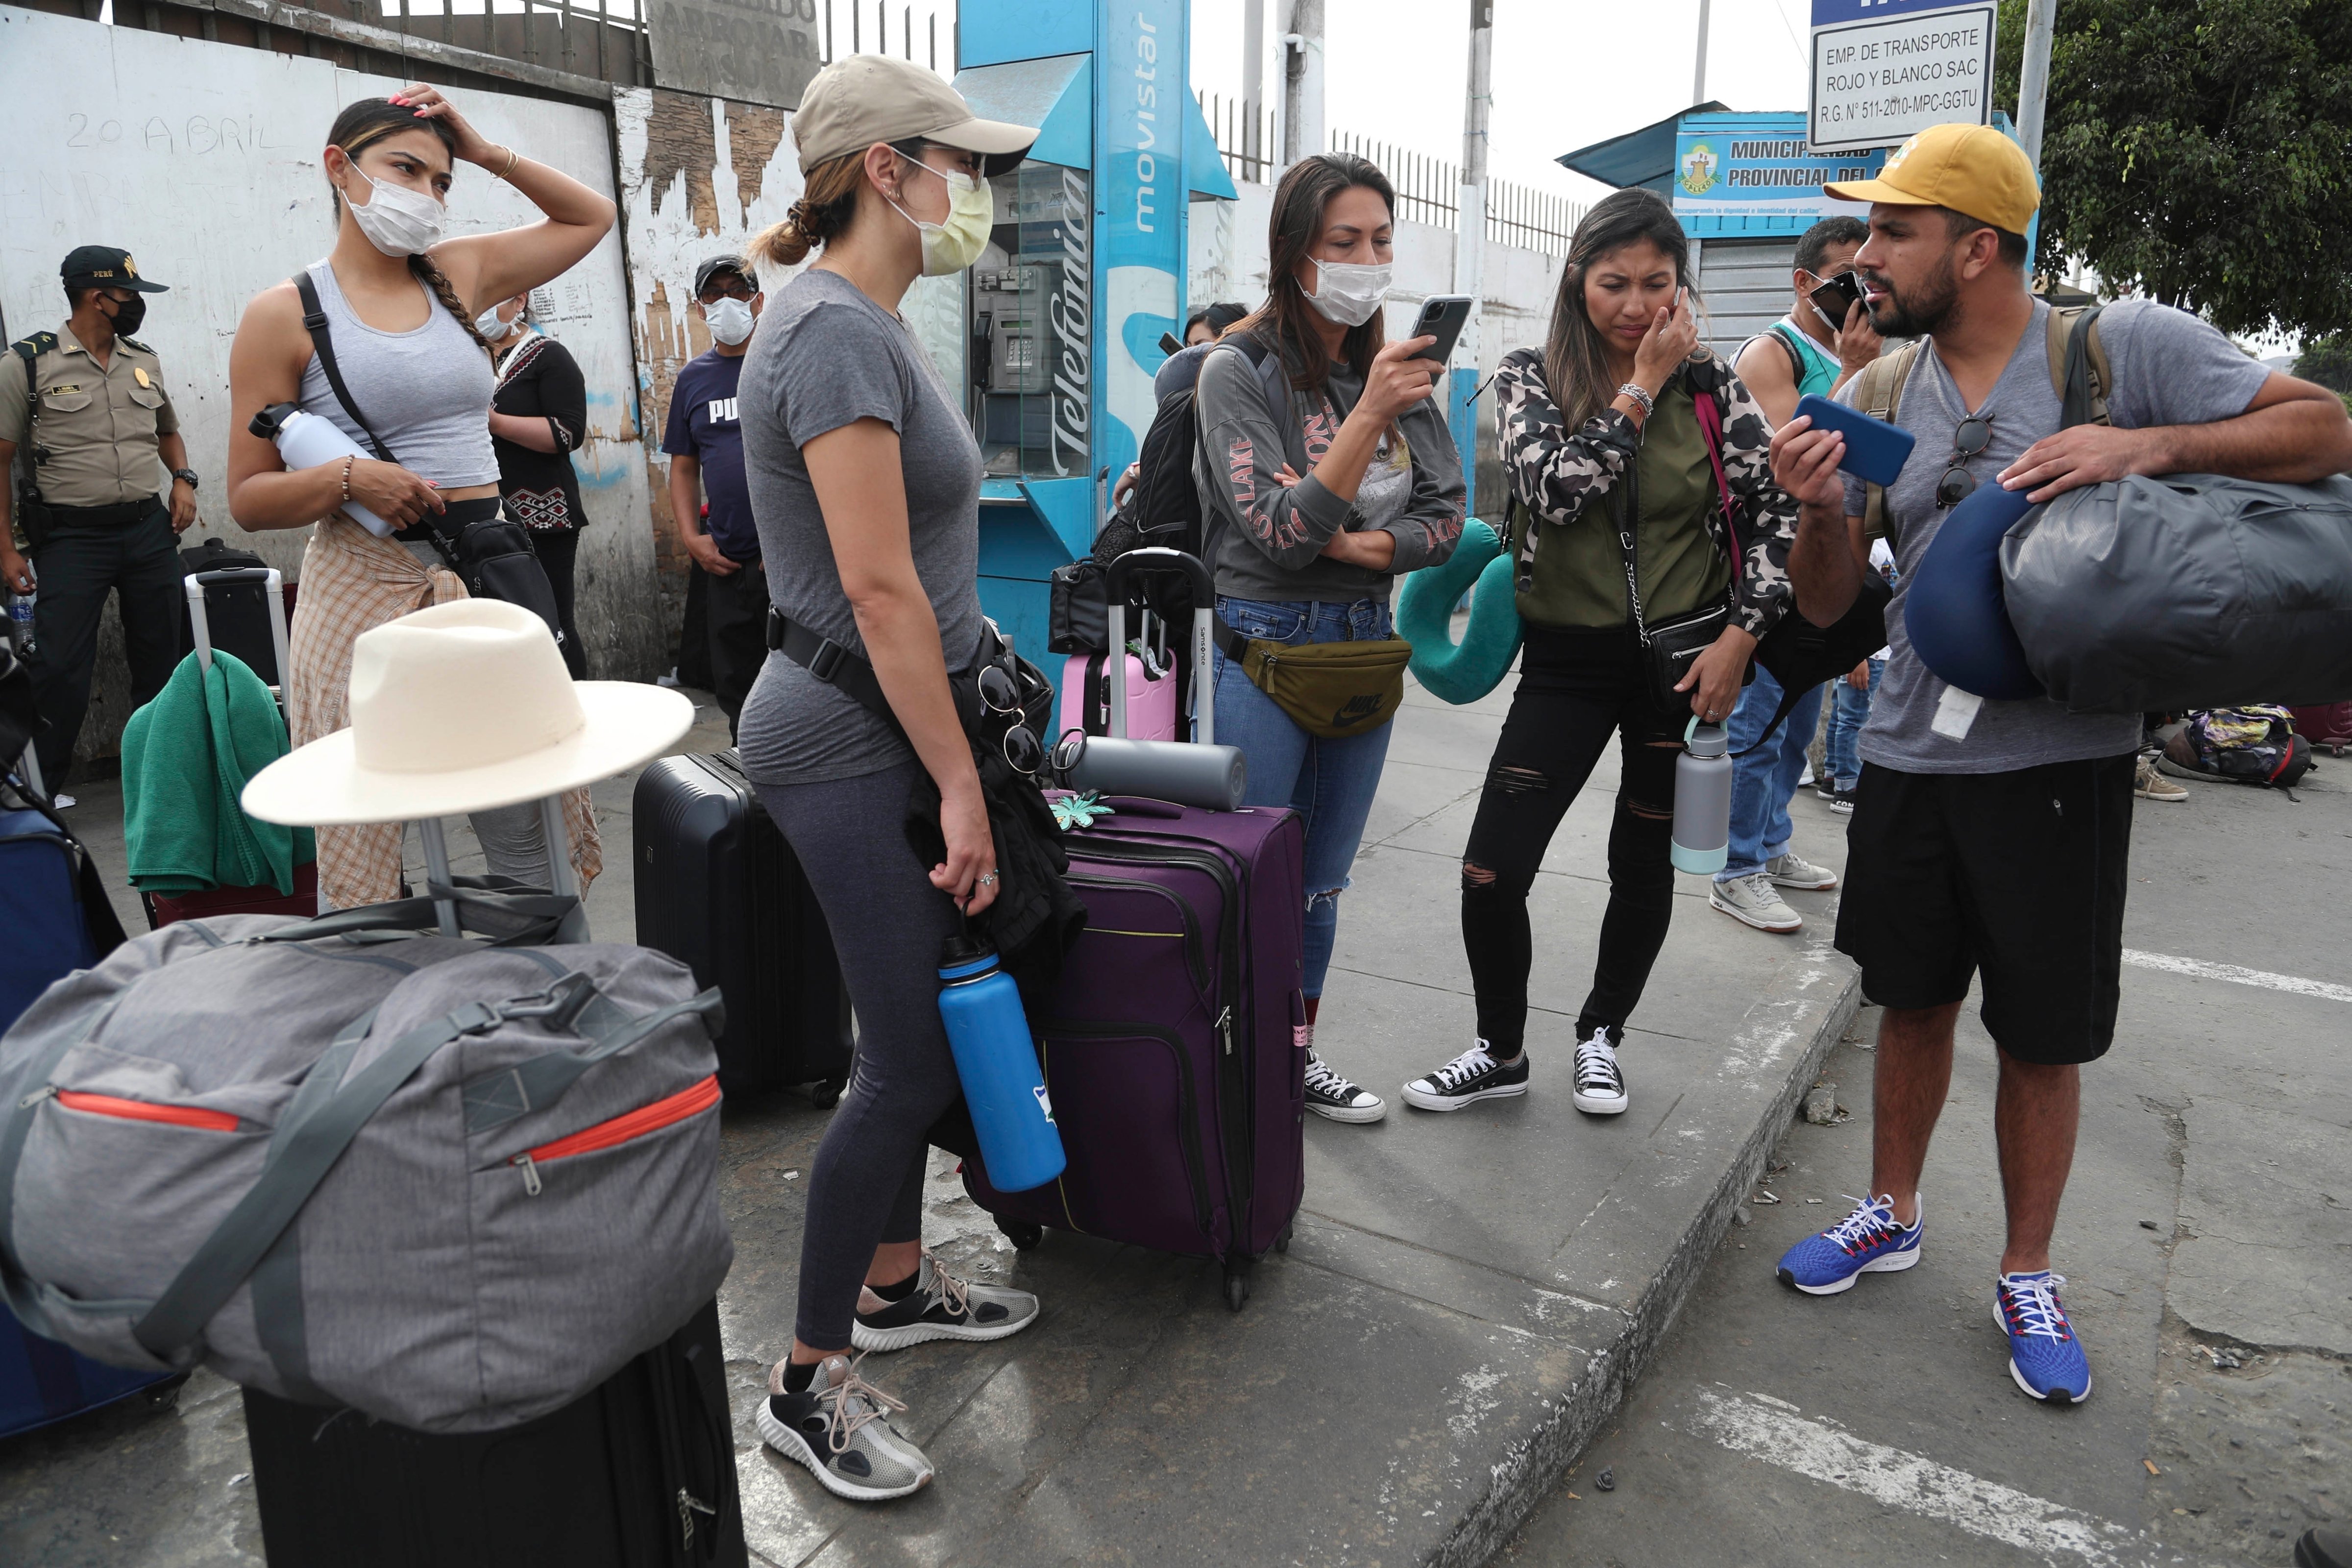 Tourists from the United States wait outside the closed Jorge Chavez International Airport for a member of the U.S. Embassy to escort them to a flight that will fly them back to the U.S., in Callao Peru, Friday, March 20, 2020, on the fifth day of a state of emergency decreed by the government to prevent the spread of the new coronavirus. (AP Photo/Martin Mejia)